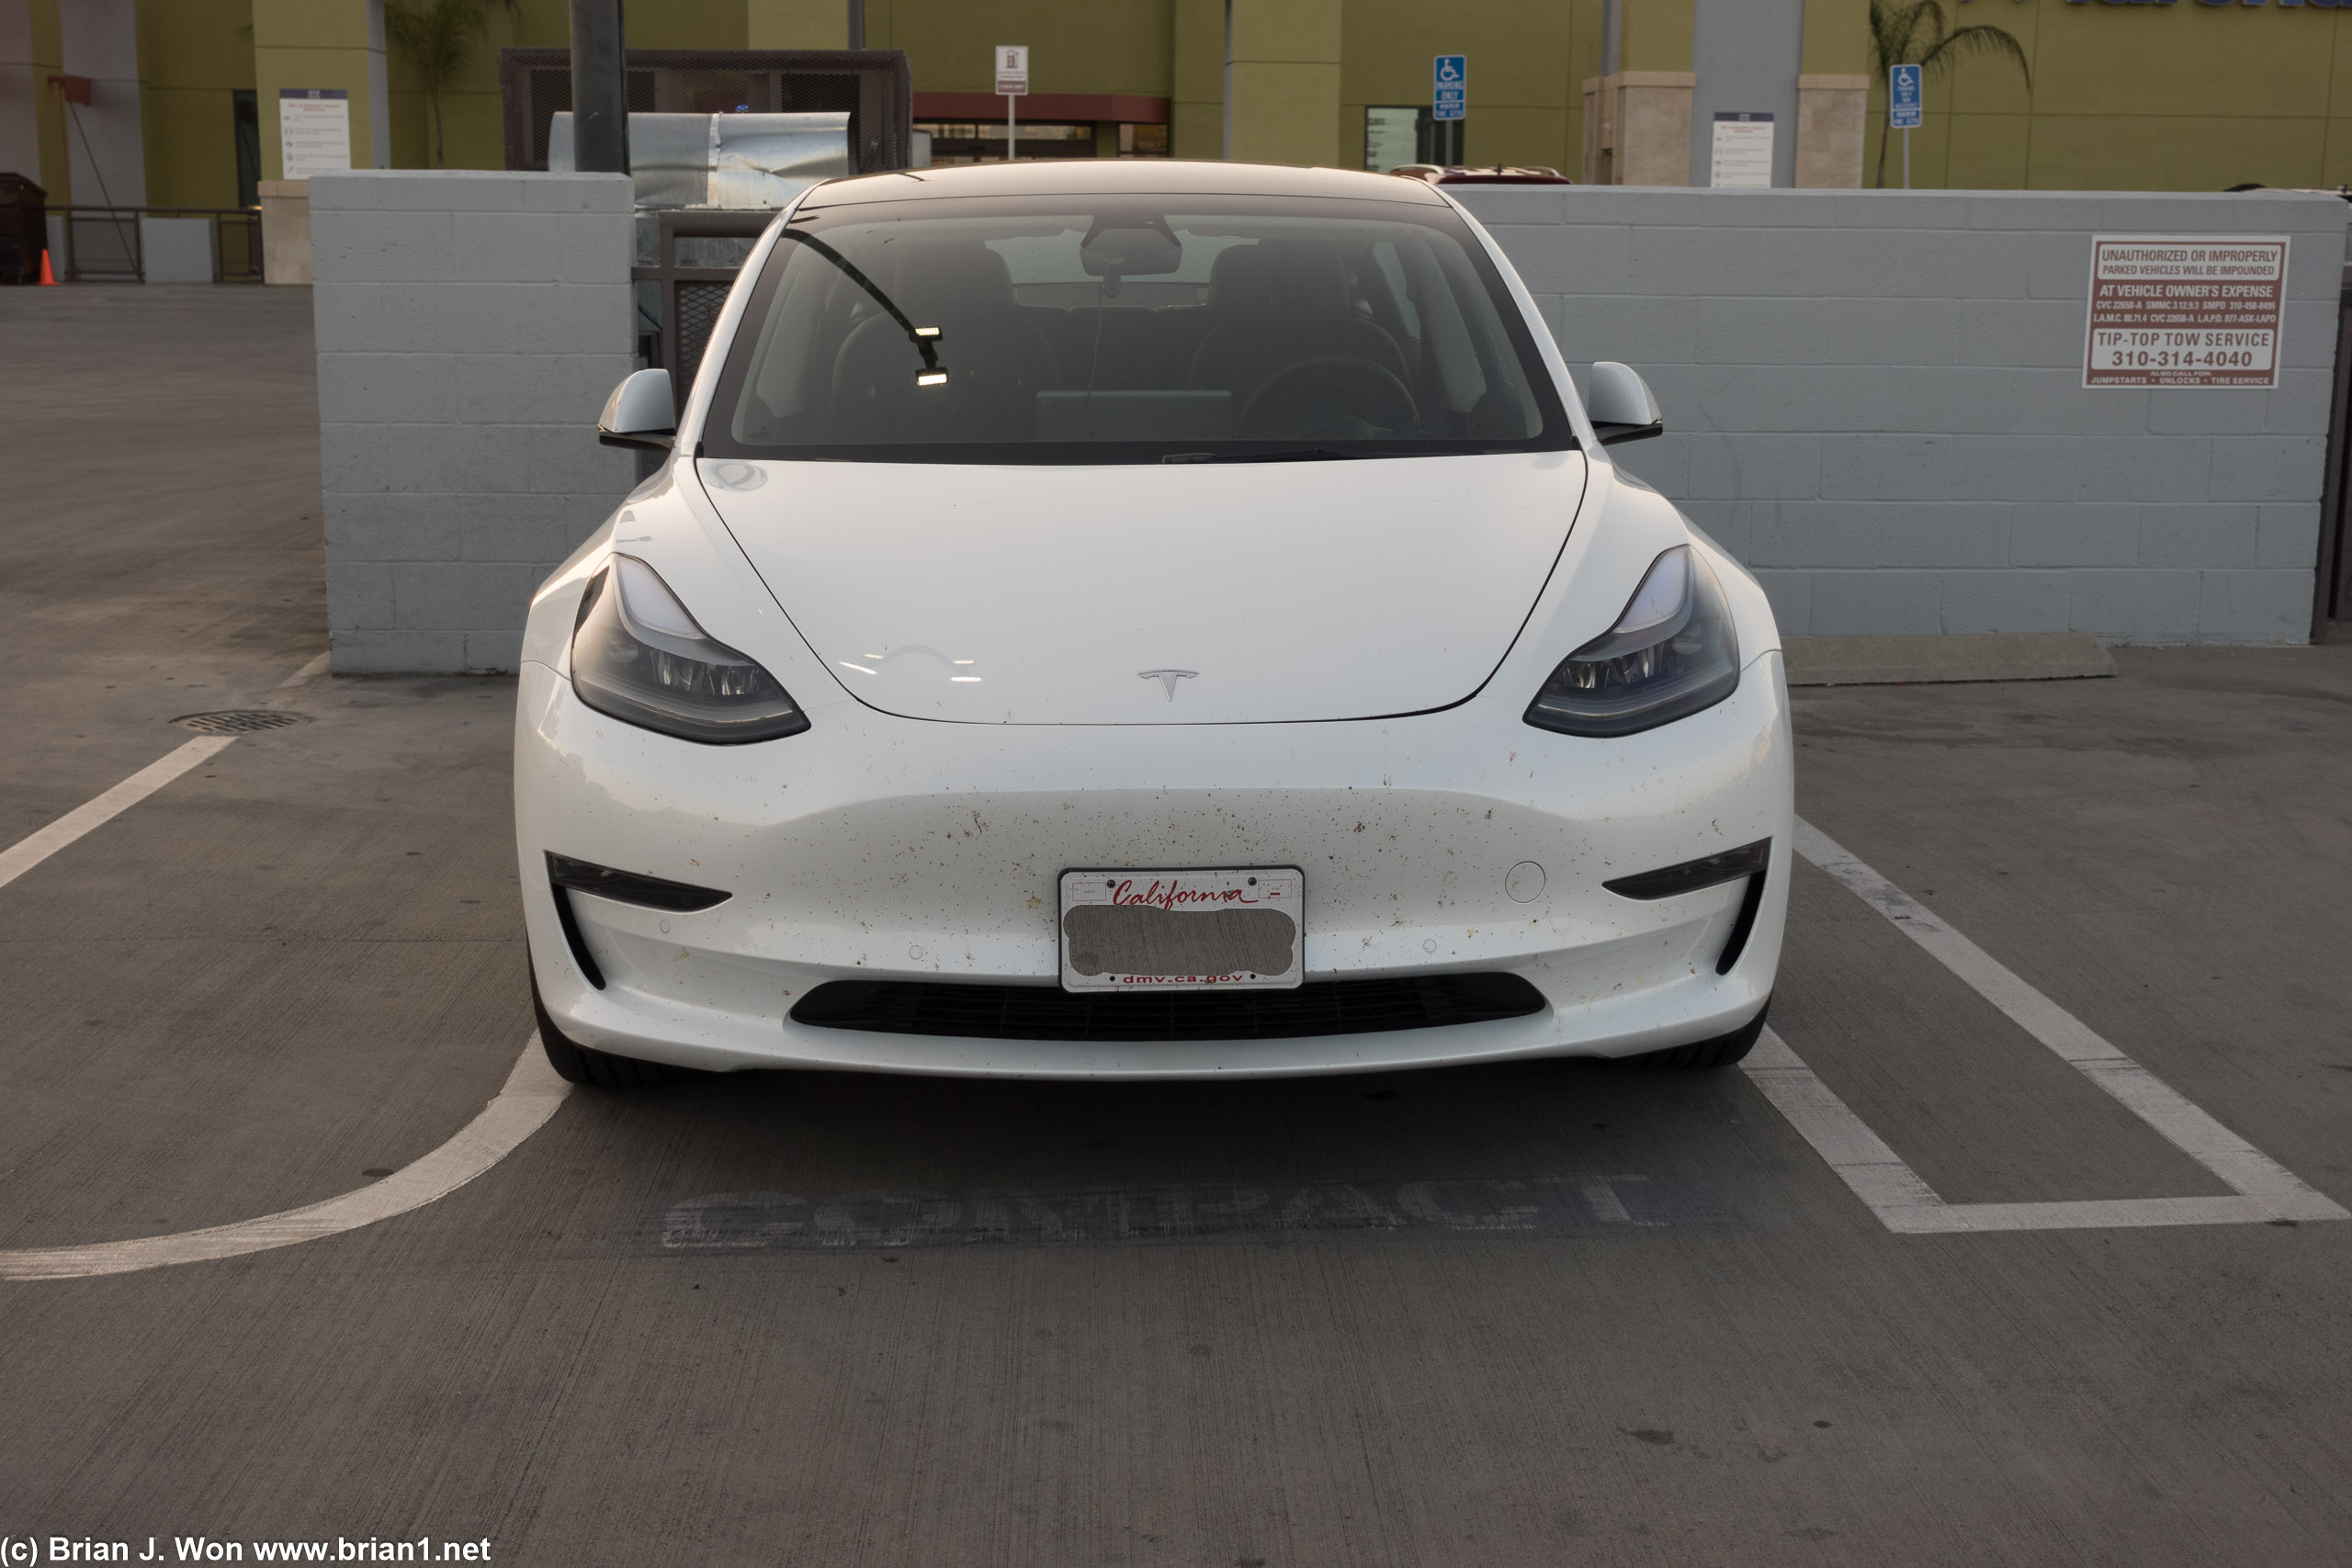 Compact spot too narrow to fit even a Model 3?